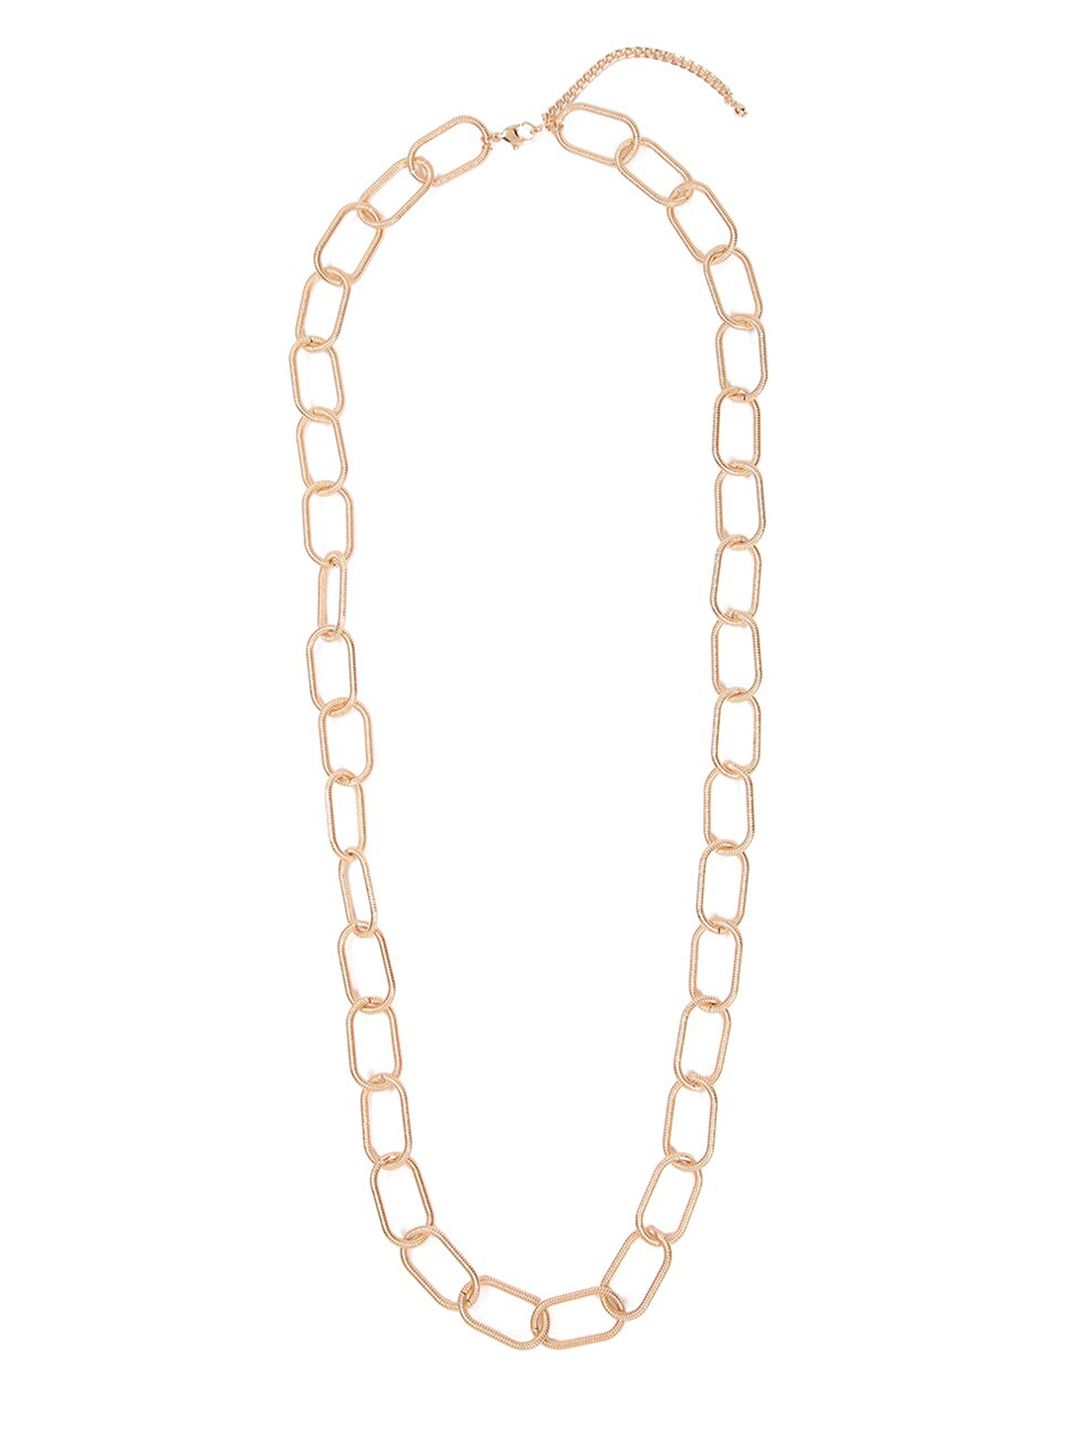 FOREVER 21 Gold-Toned Metal Loop Chain Necklace Price in India